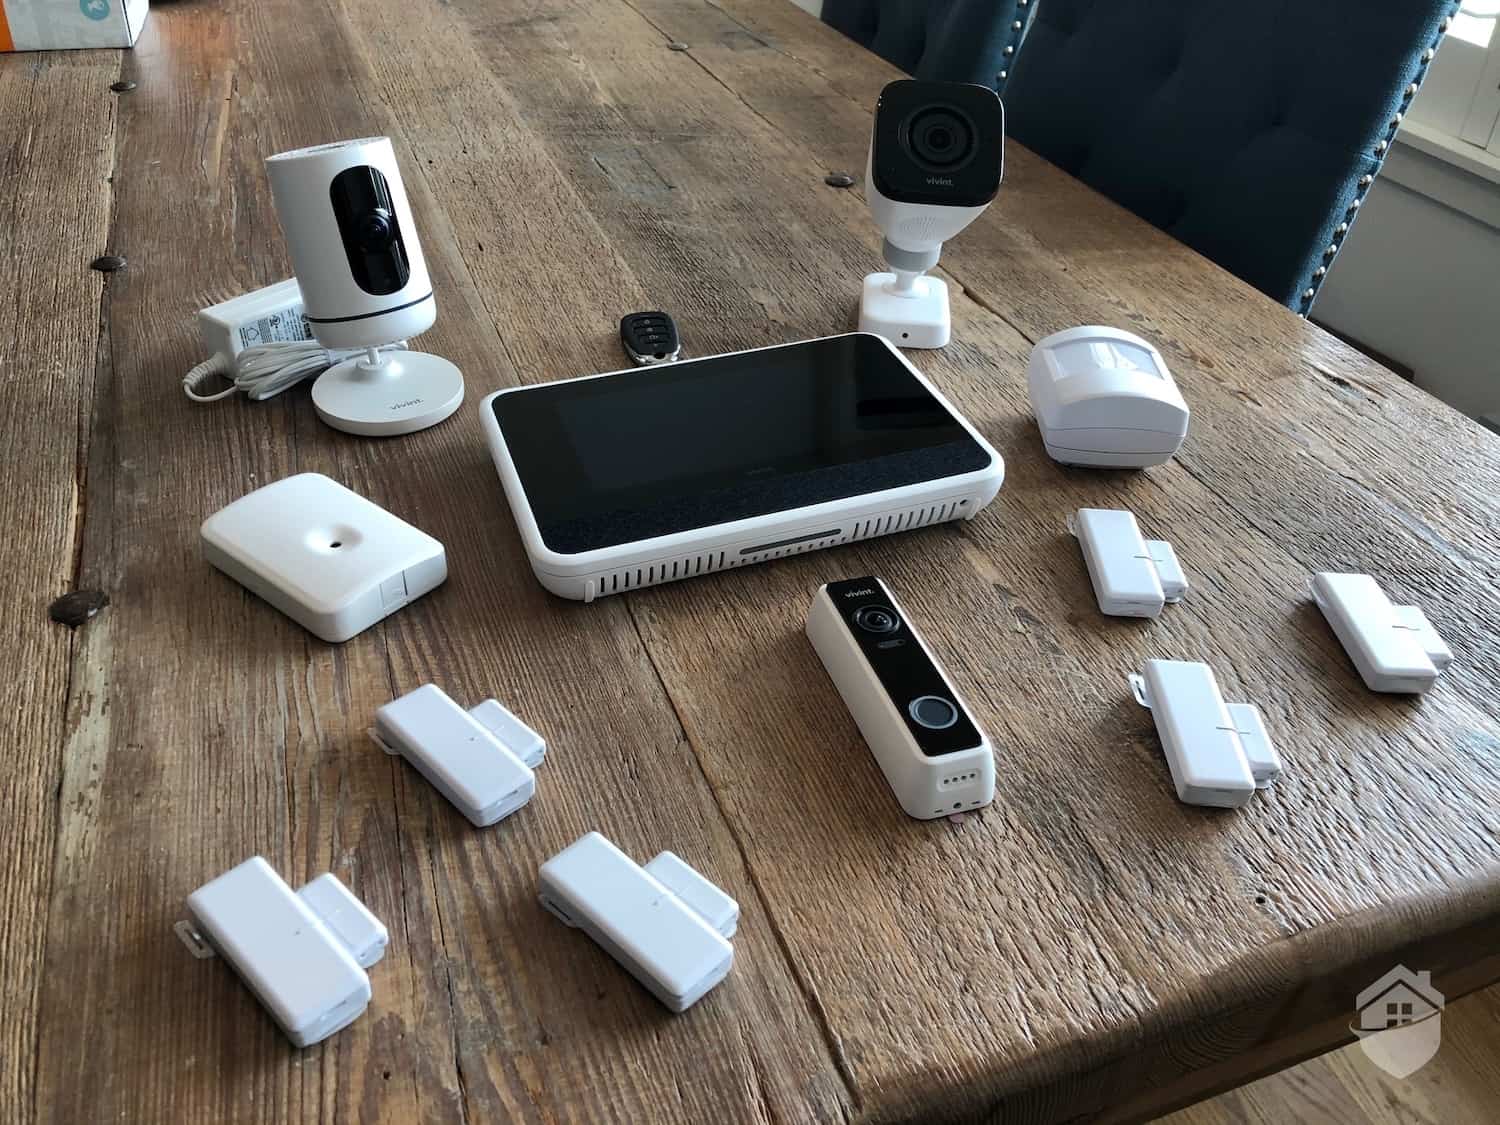 All Equipment in the Vivint Home Security System